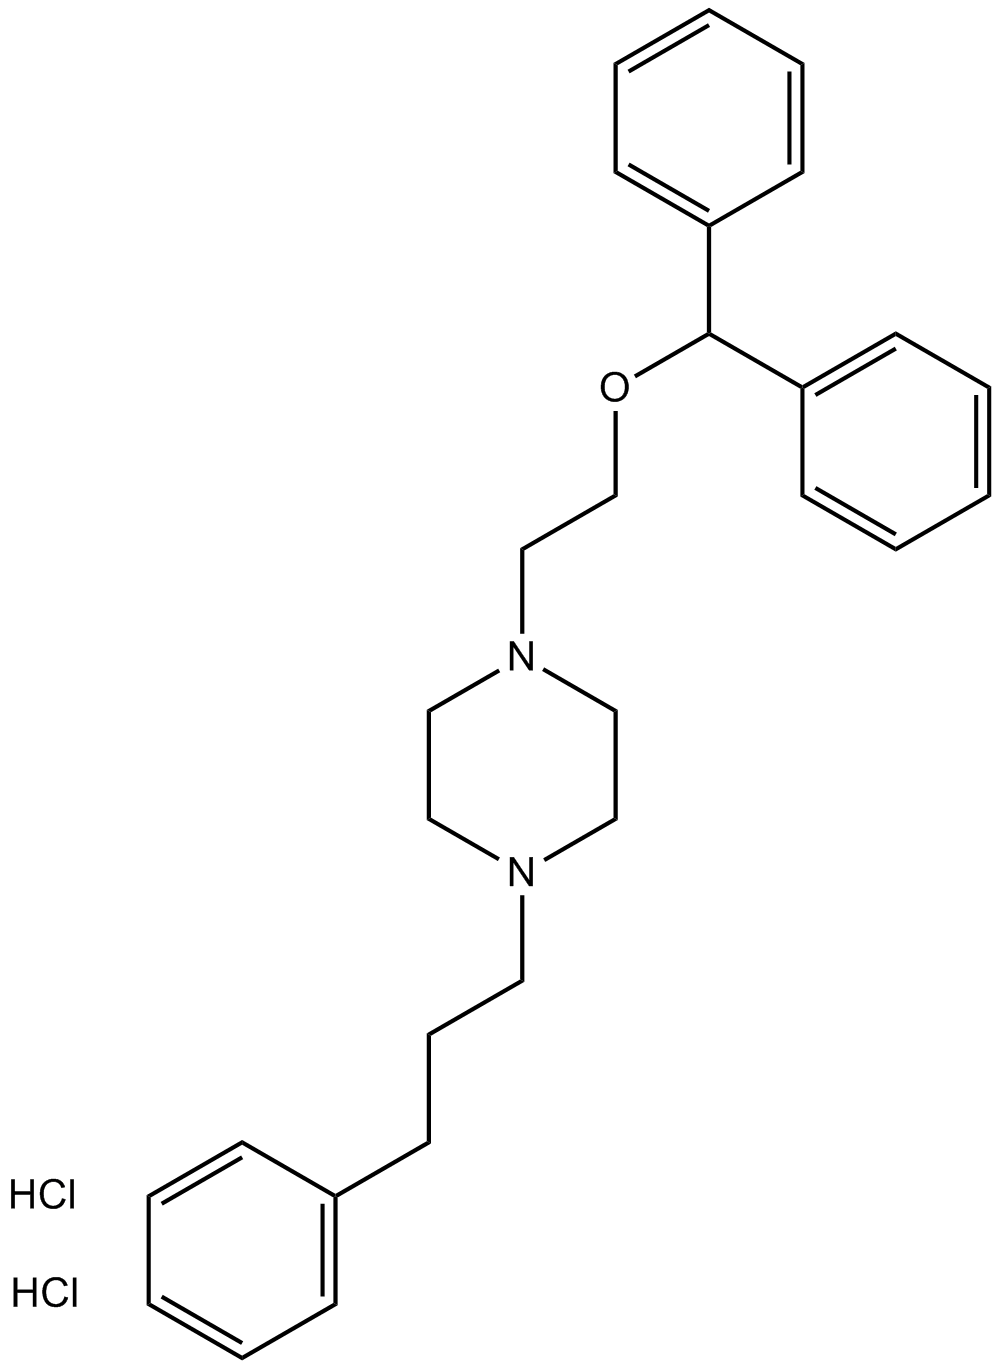 GBR 12935 dihydrochloride  Chemical Structure